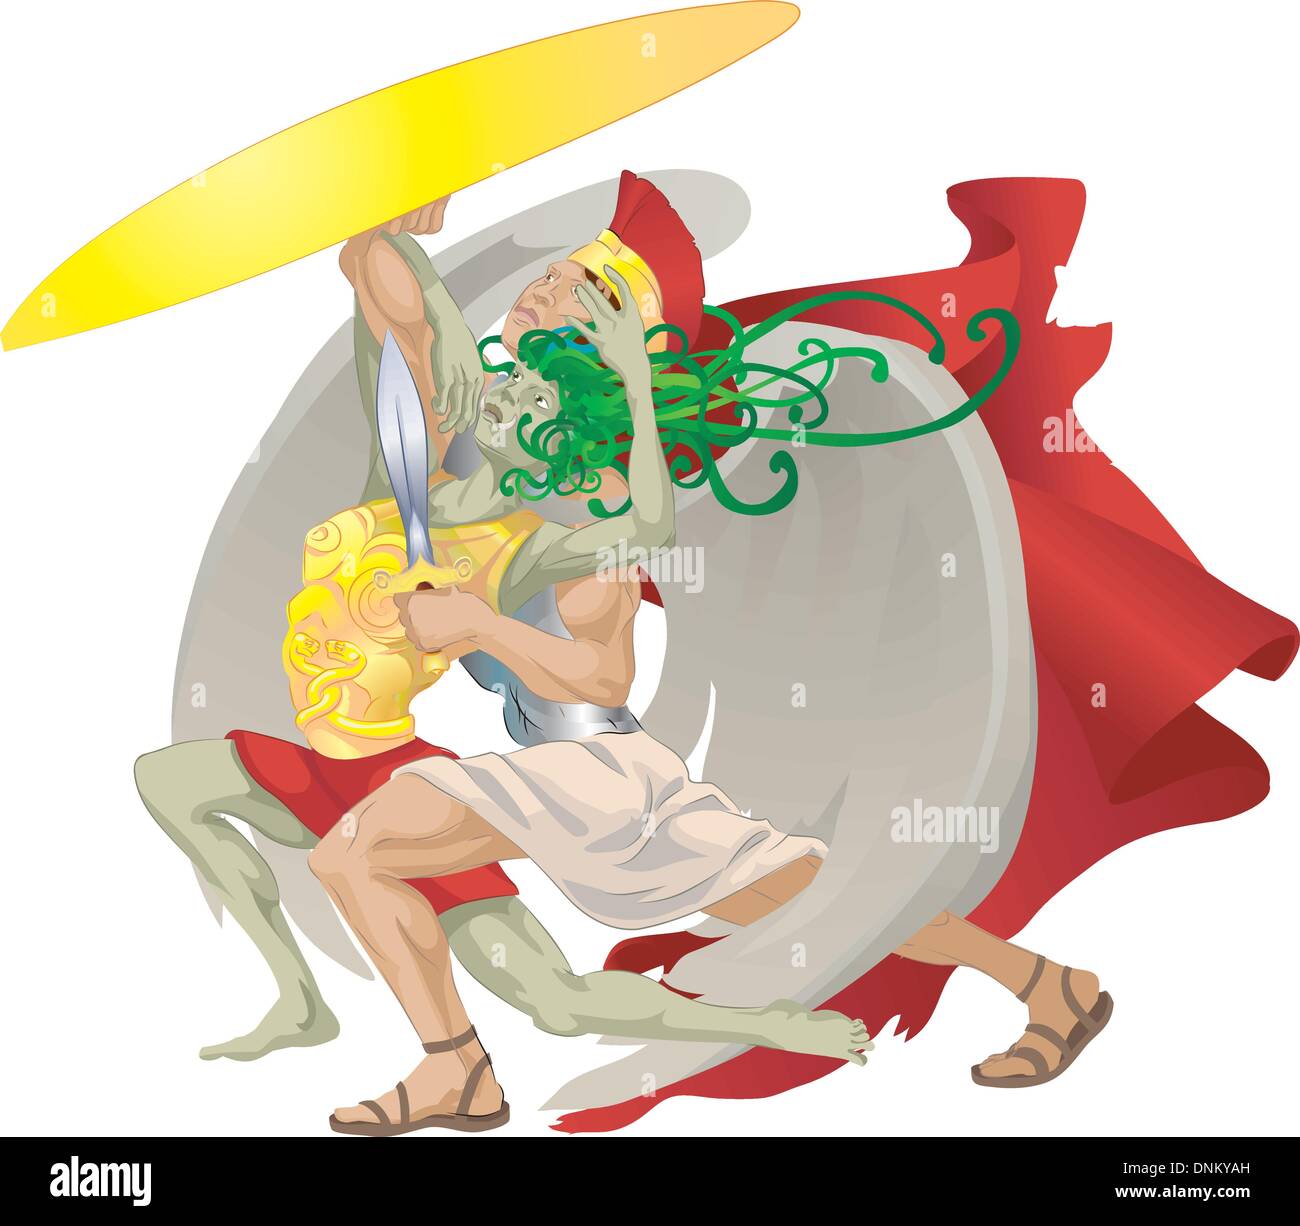 Perseus from classical mythology slaying medusa. No meshes used. Stock Vector